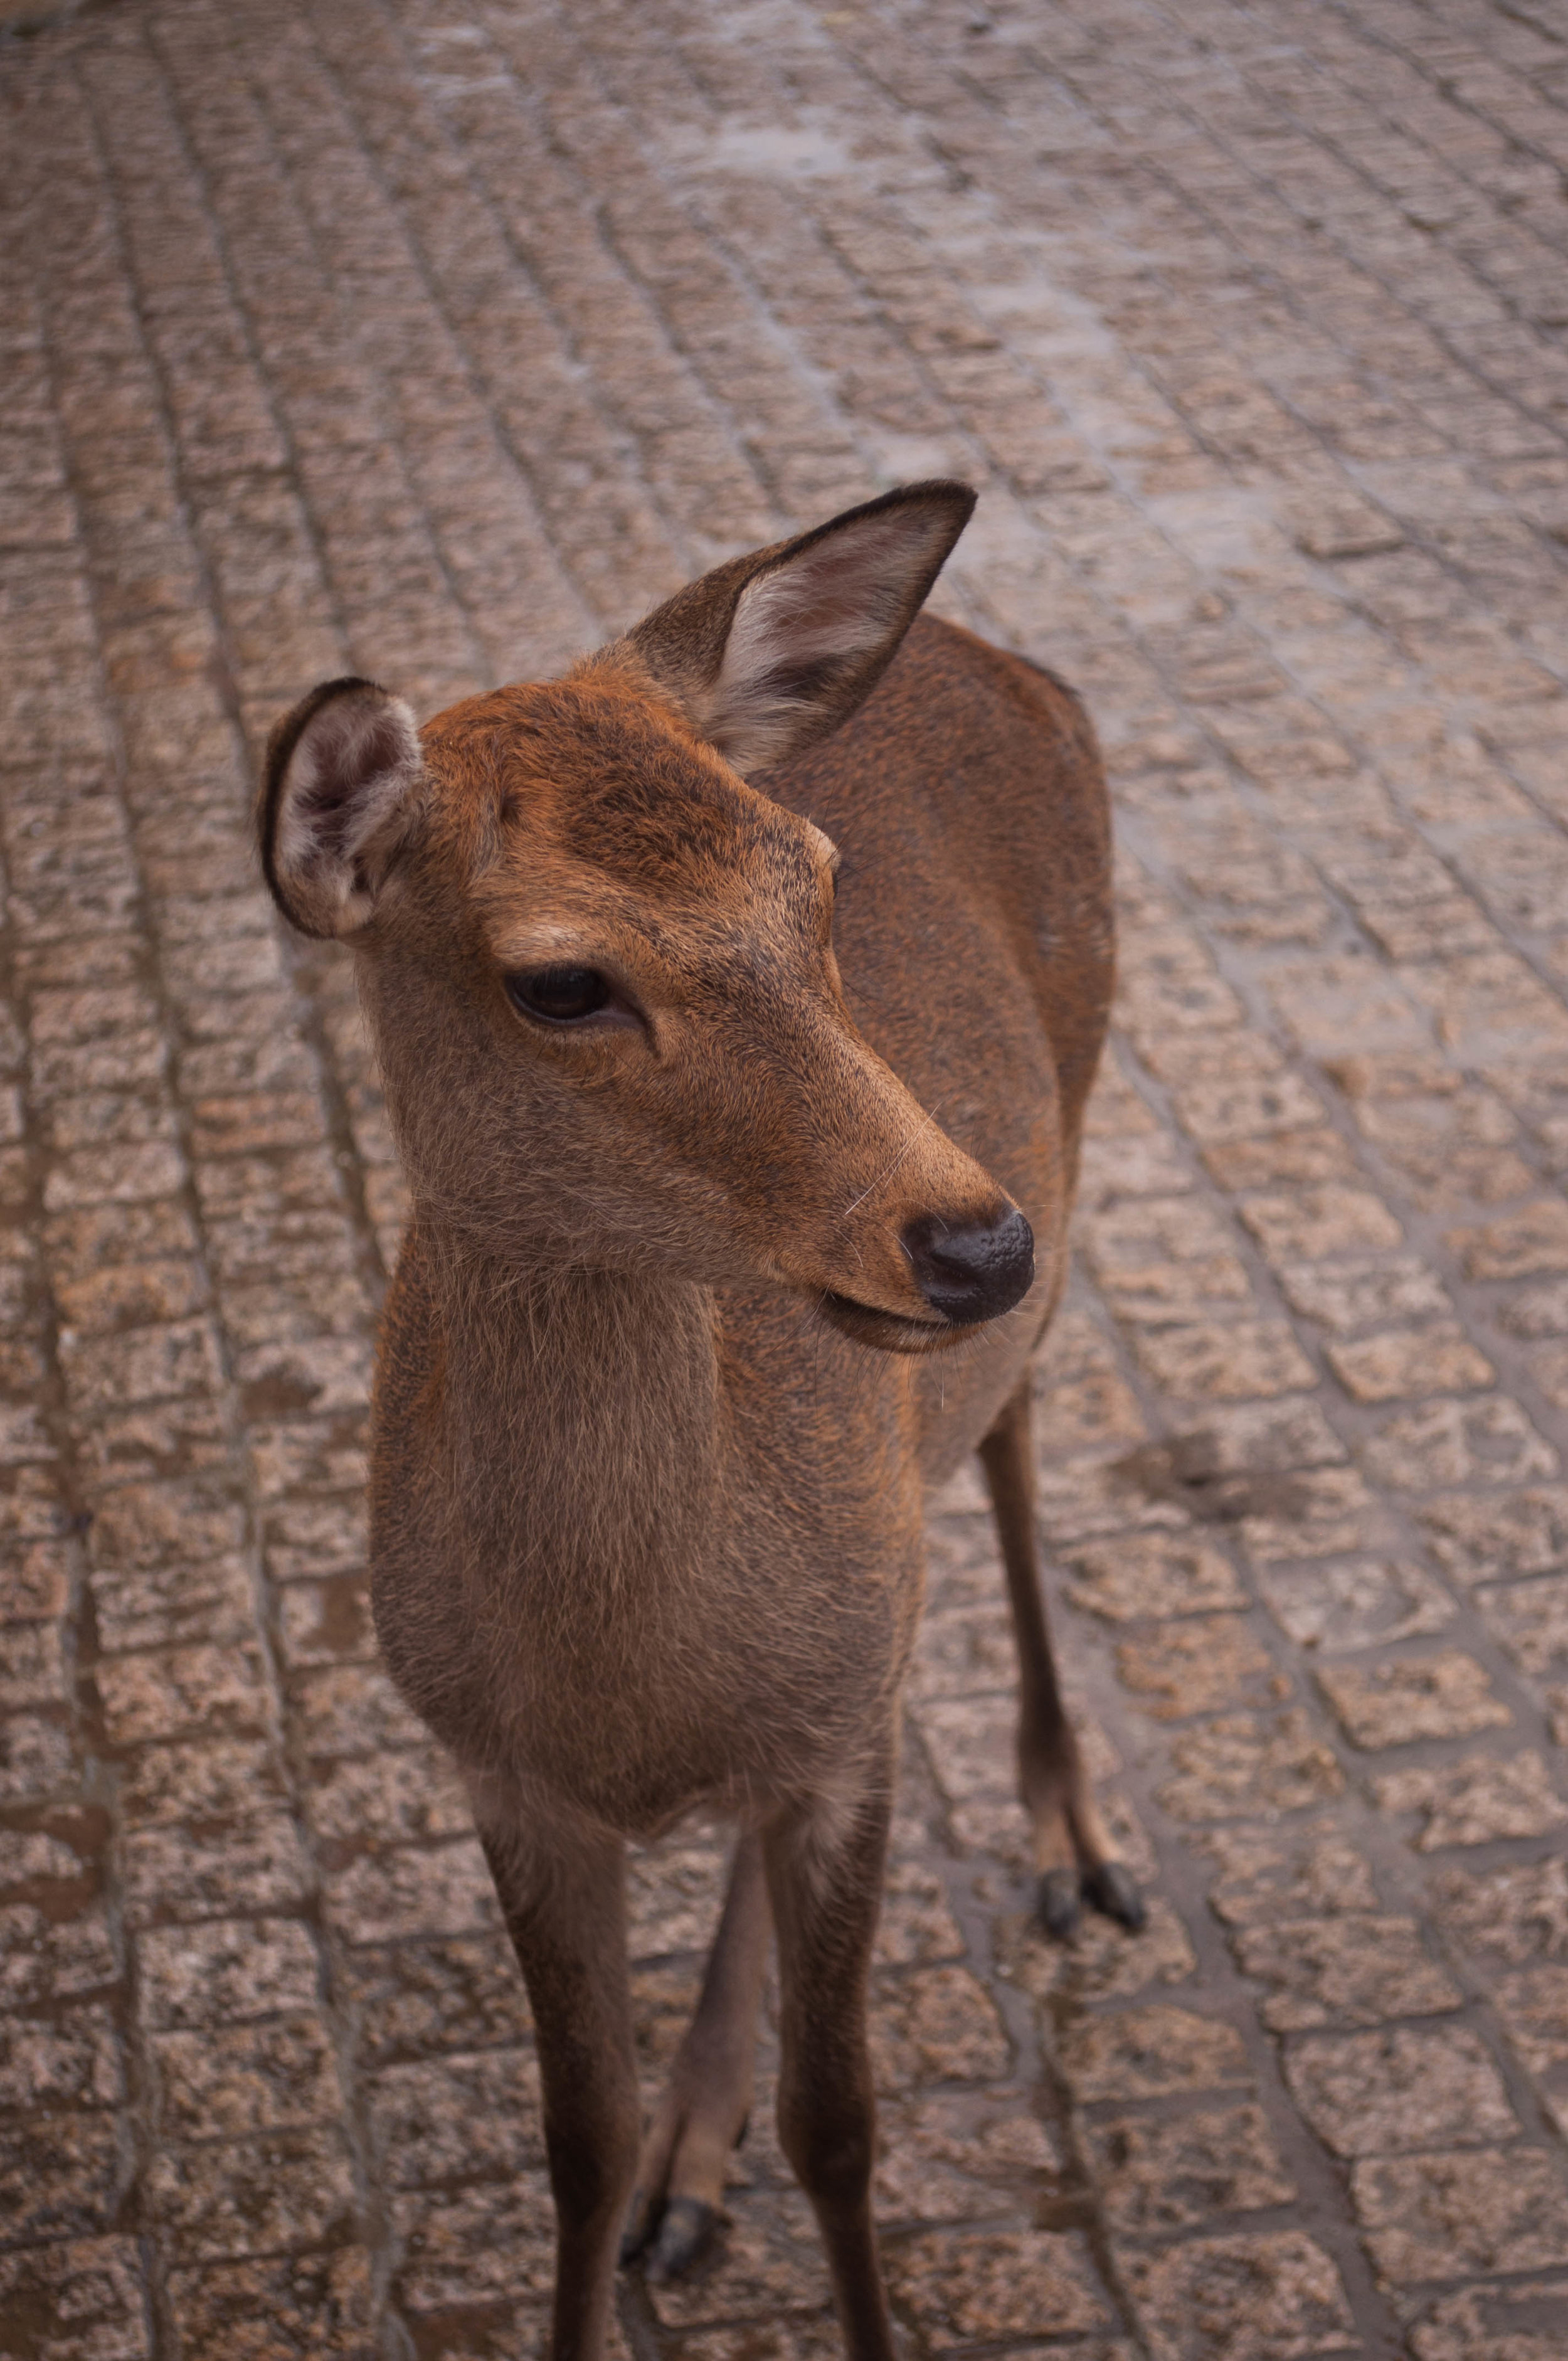 Nara and its deer part of the itinerary for couples doing their honeymoon in Japan